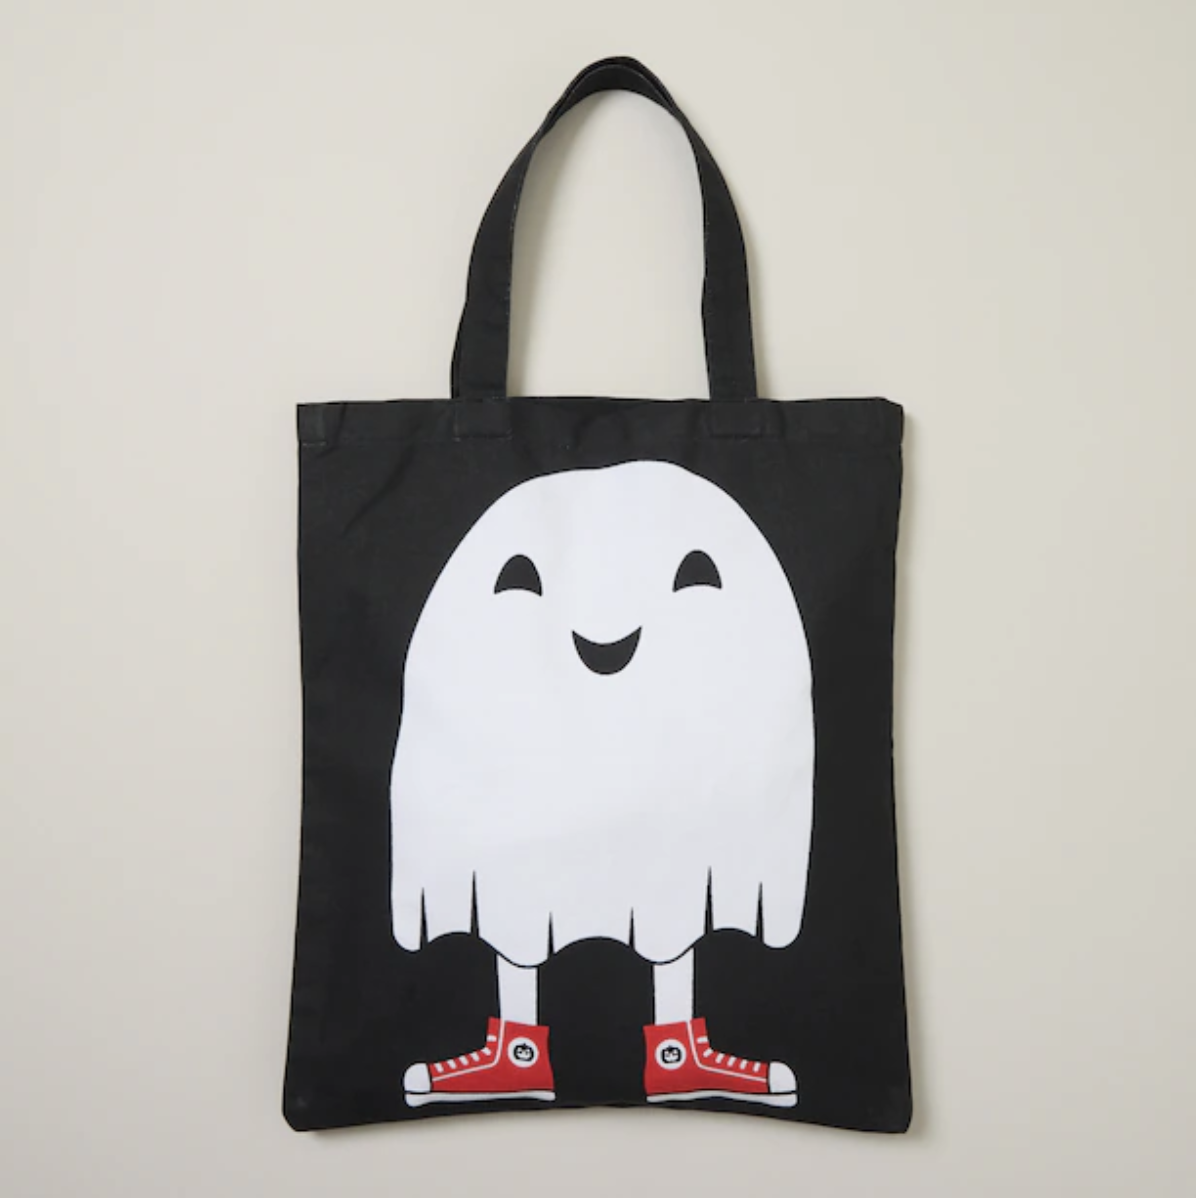 the ghost tote against a plain background